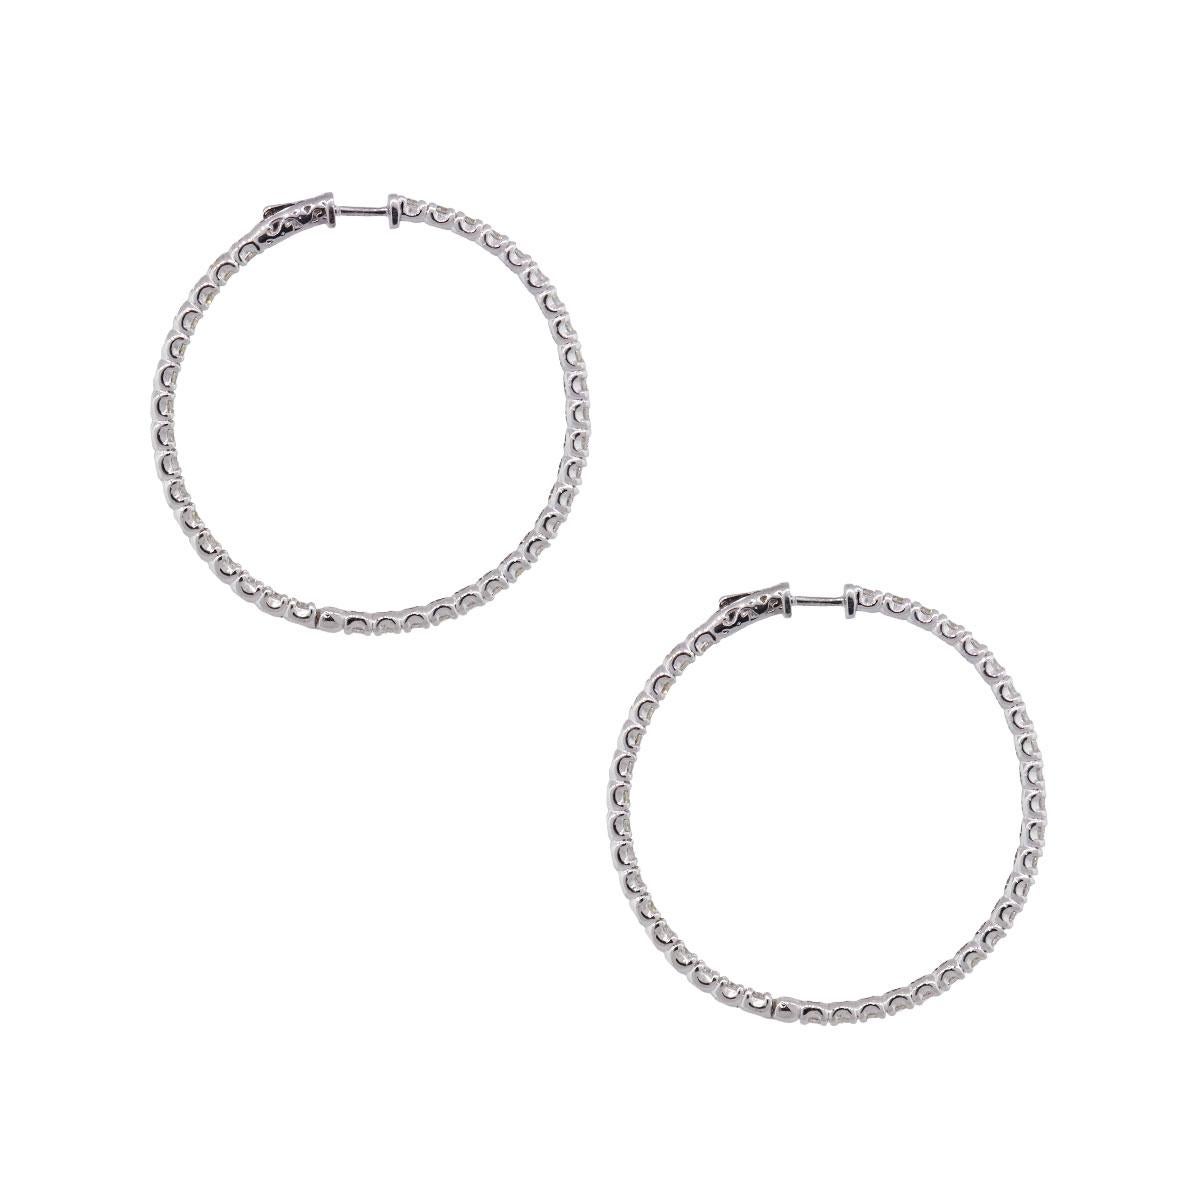 Material: 14k white gold
Diamond Details: Approximately 6.22tw of round brilliant diamonds. Diamonds are G/H in color and VS in clarity.
Measurements: 2″ 0.13″ x 2″
Earrings Backs: Hoop
Total Weight: 17.3g (11.1dwt)
Additional Details: This item